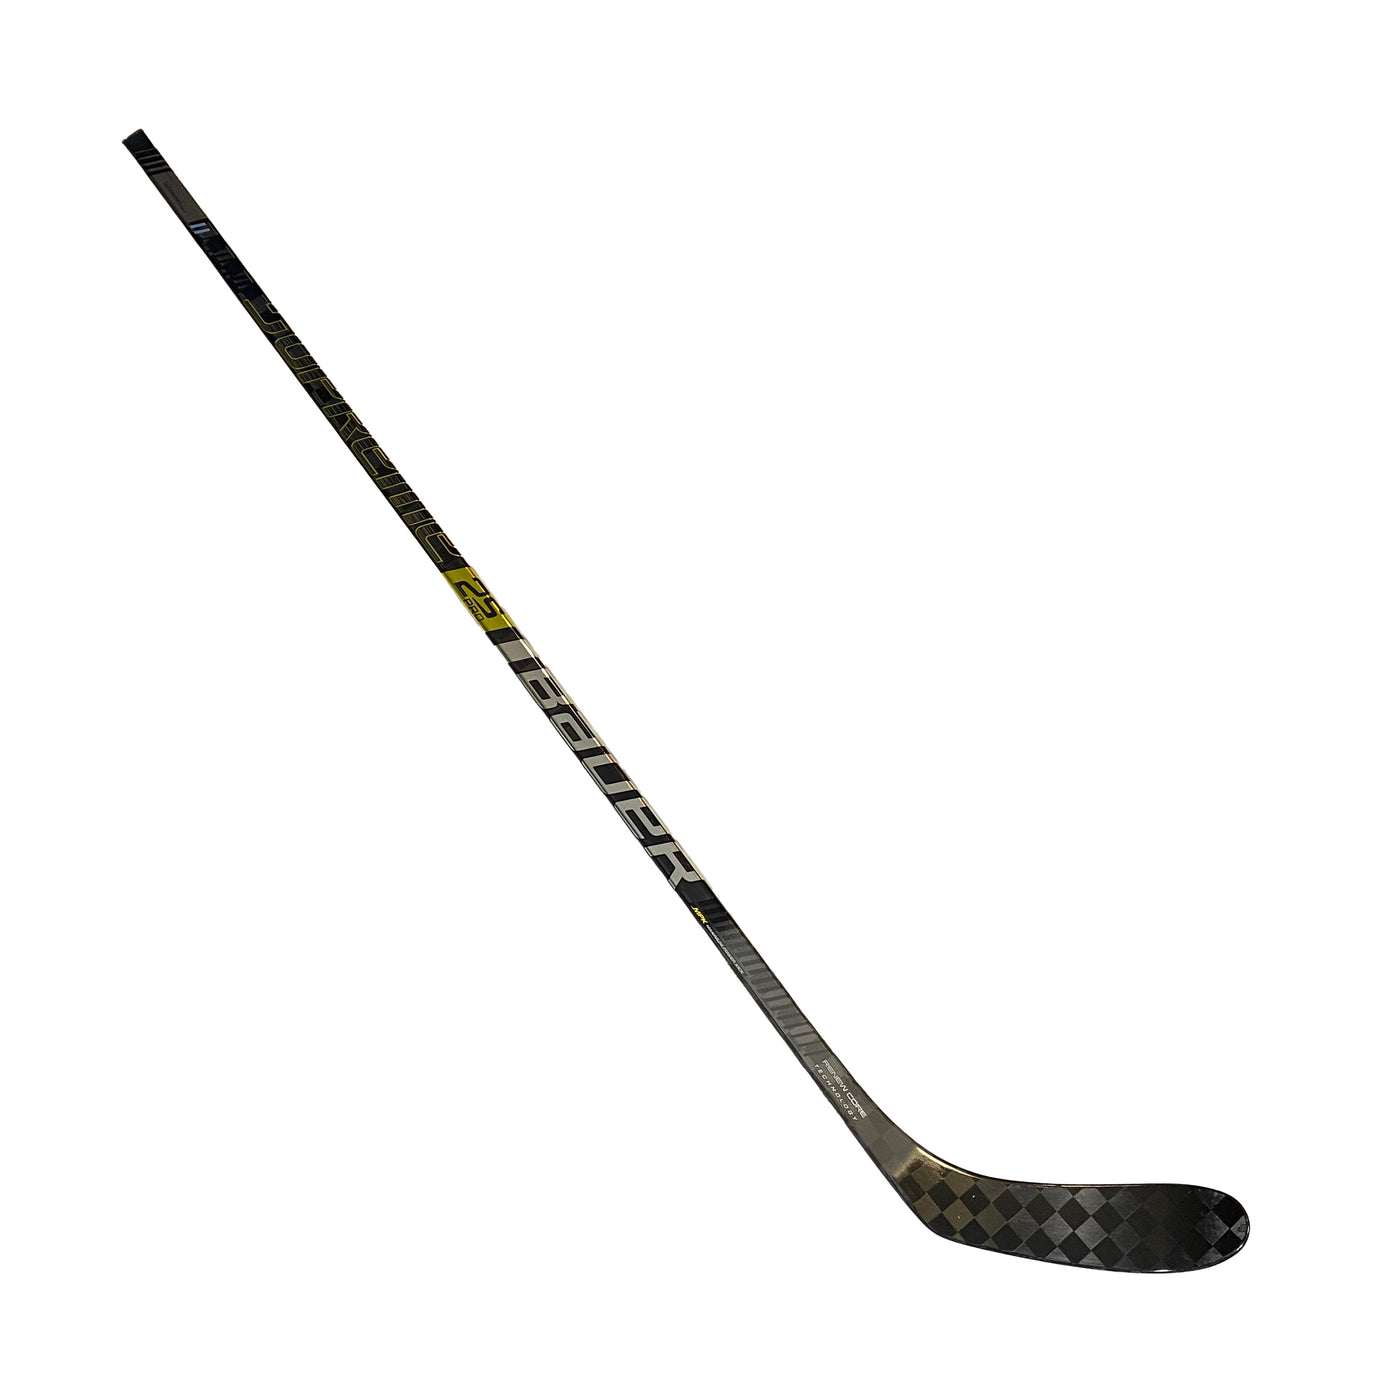 Bauer Supreme 2S Pro - Duncan Keith - Pro Stock Stick - G3